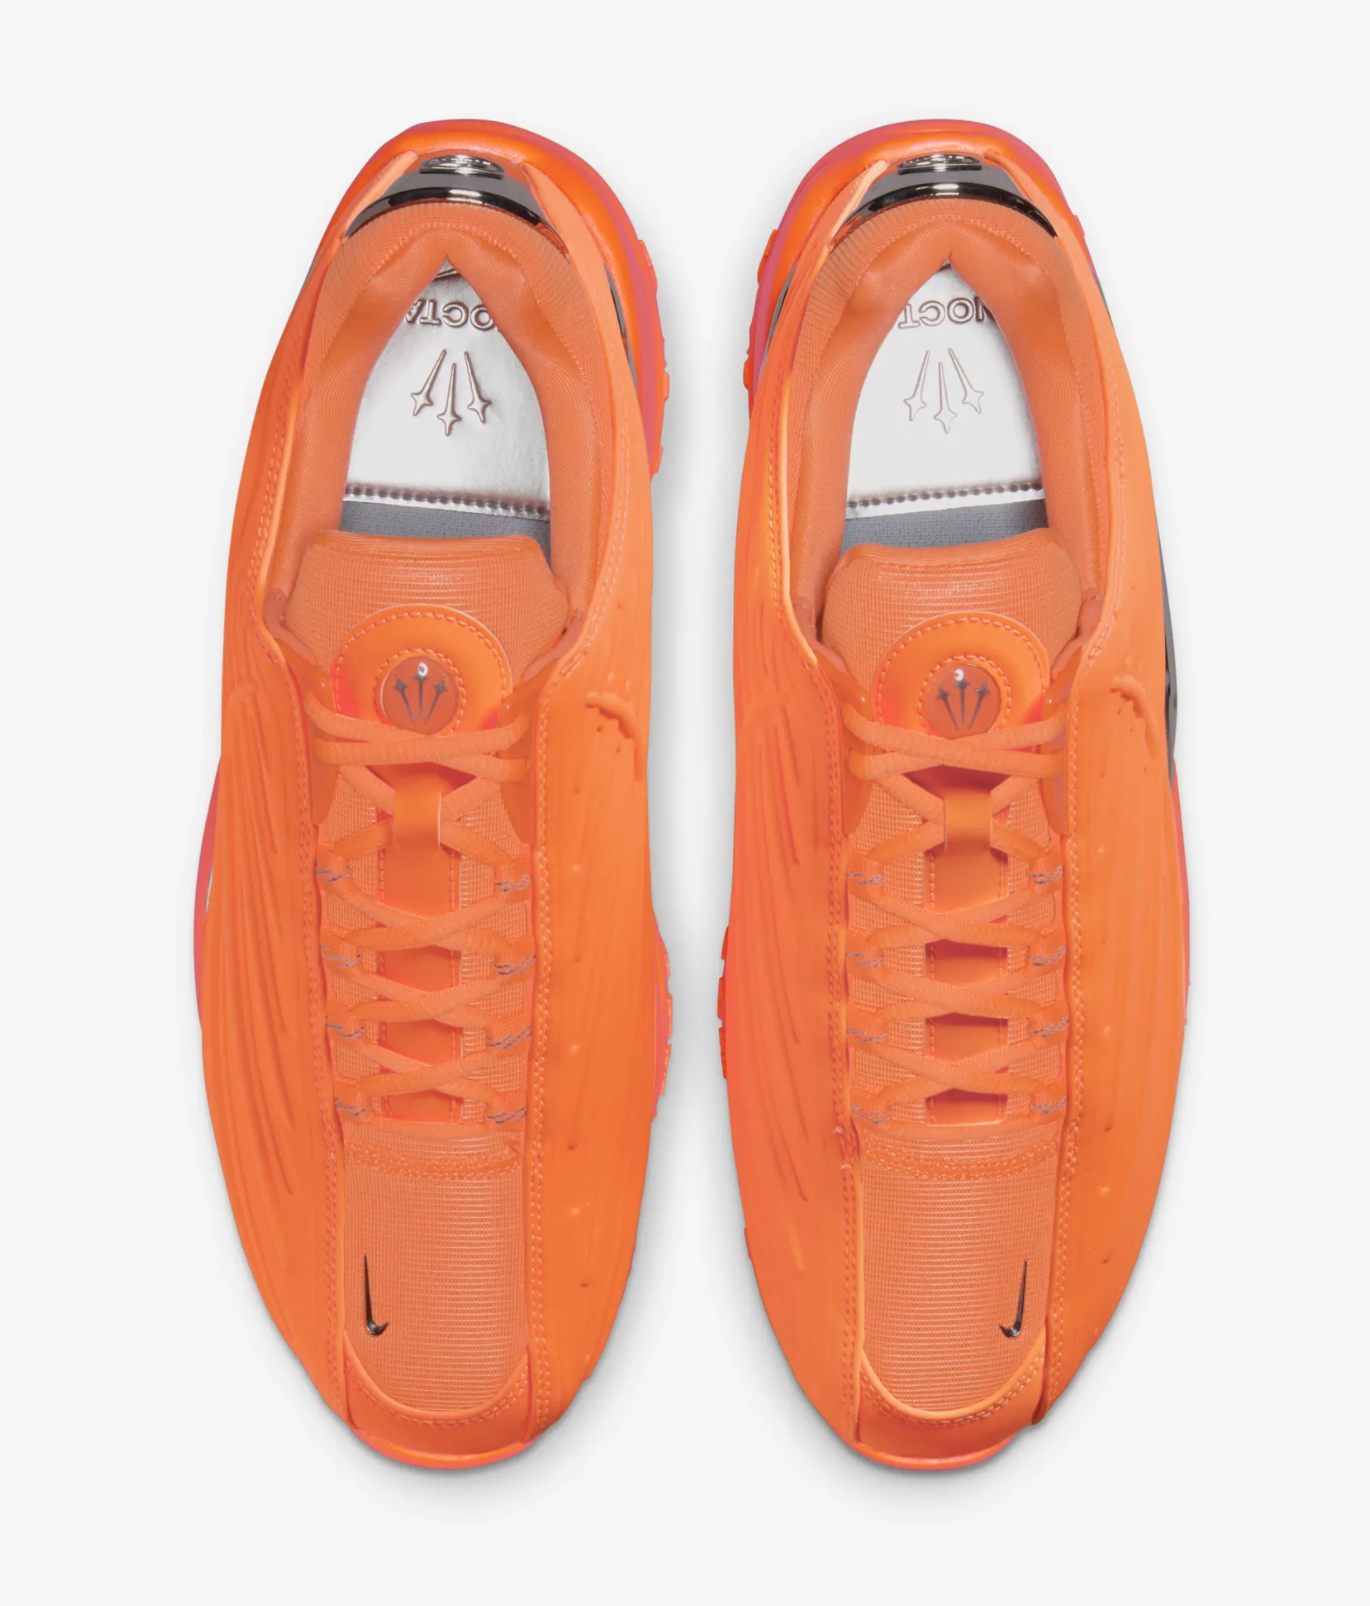 Top view of a pair of Nike Air Max sneakers in orange with laces tied, on a white background